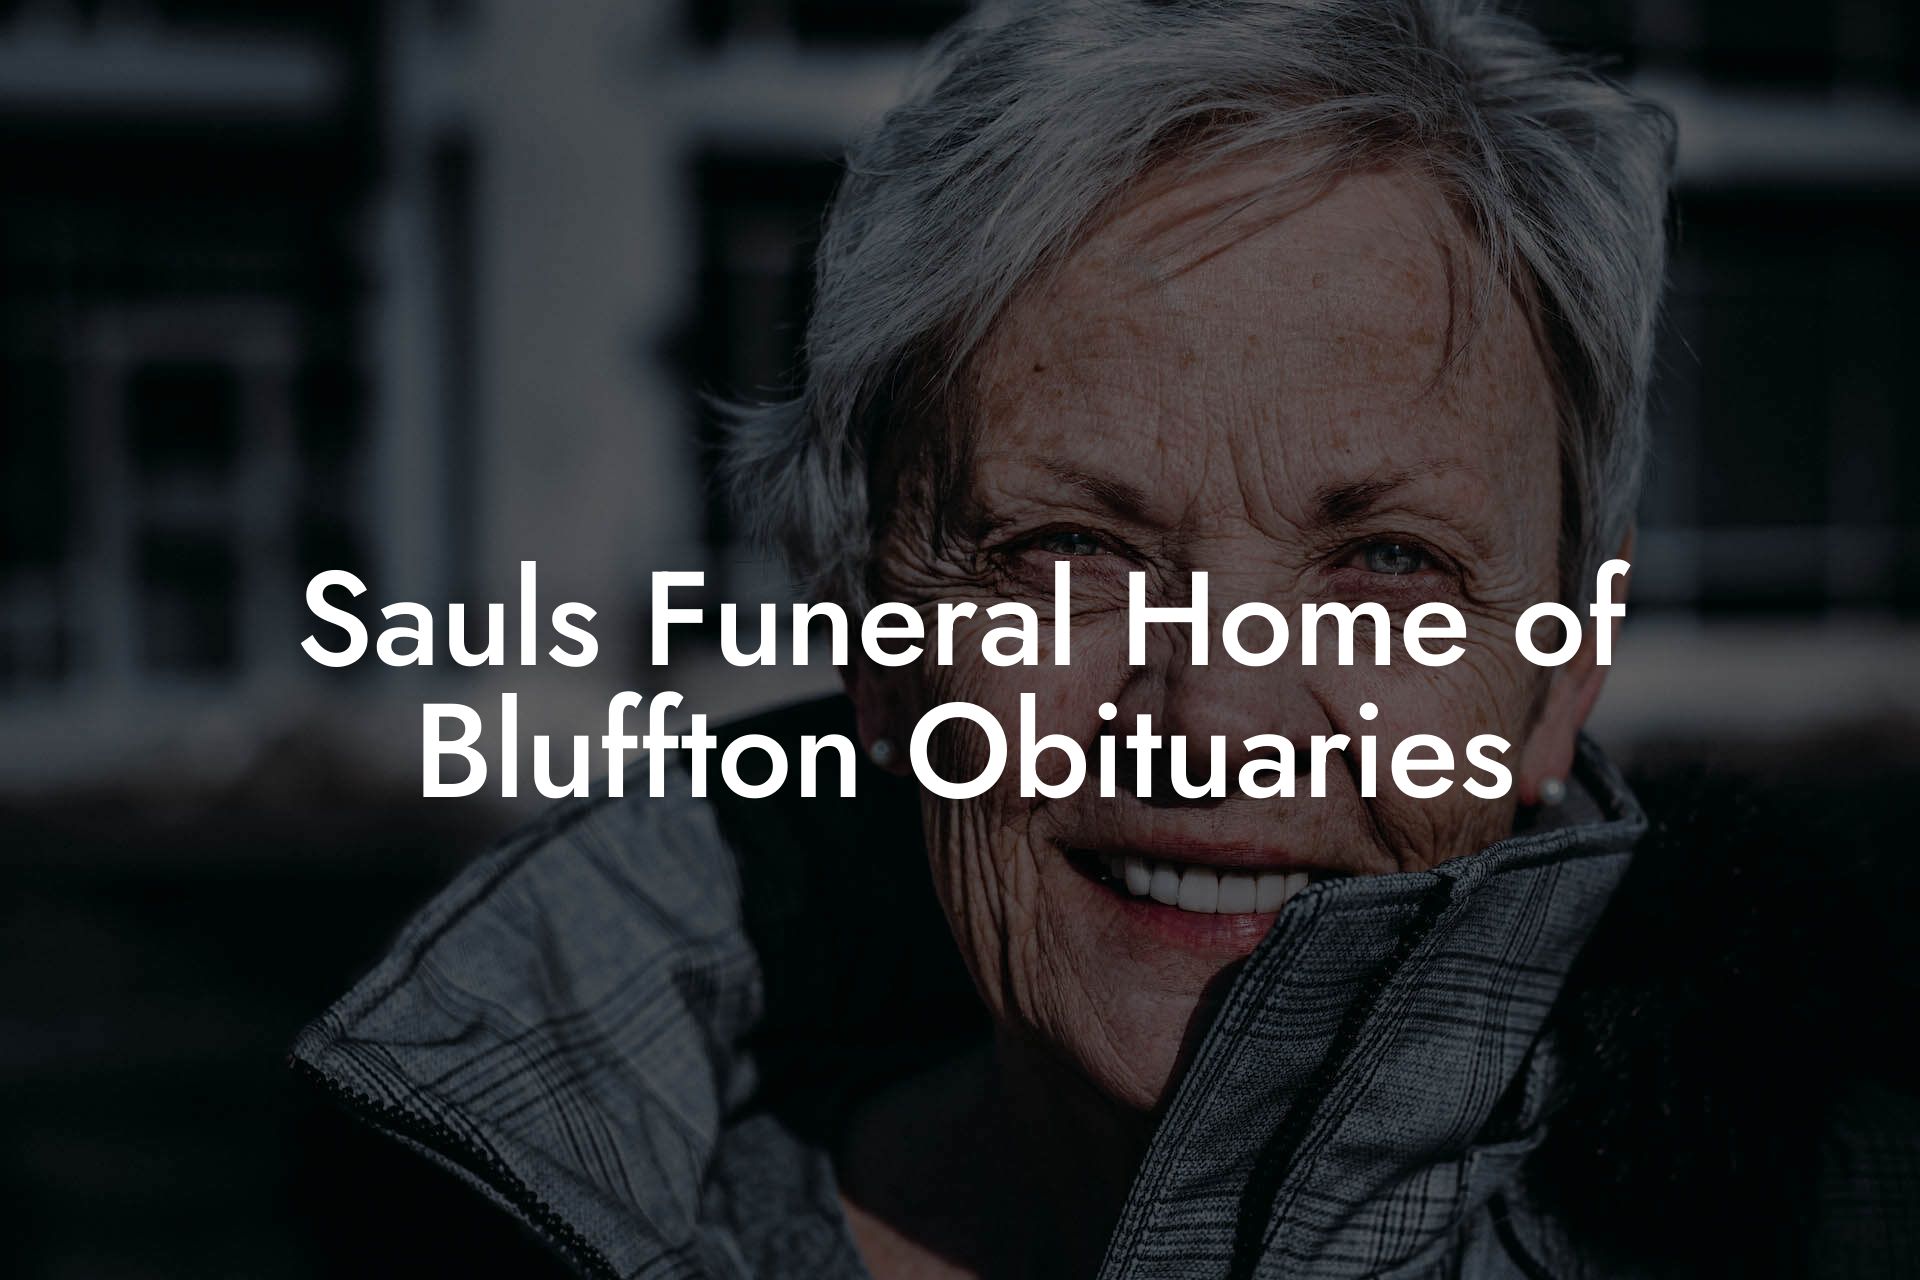 Sauls Funeral Home of Bluffton Obituaries